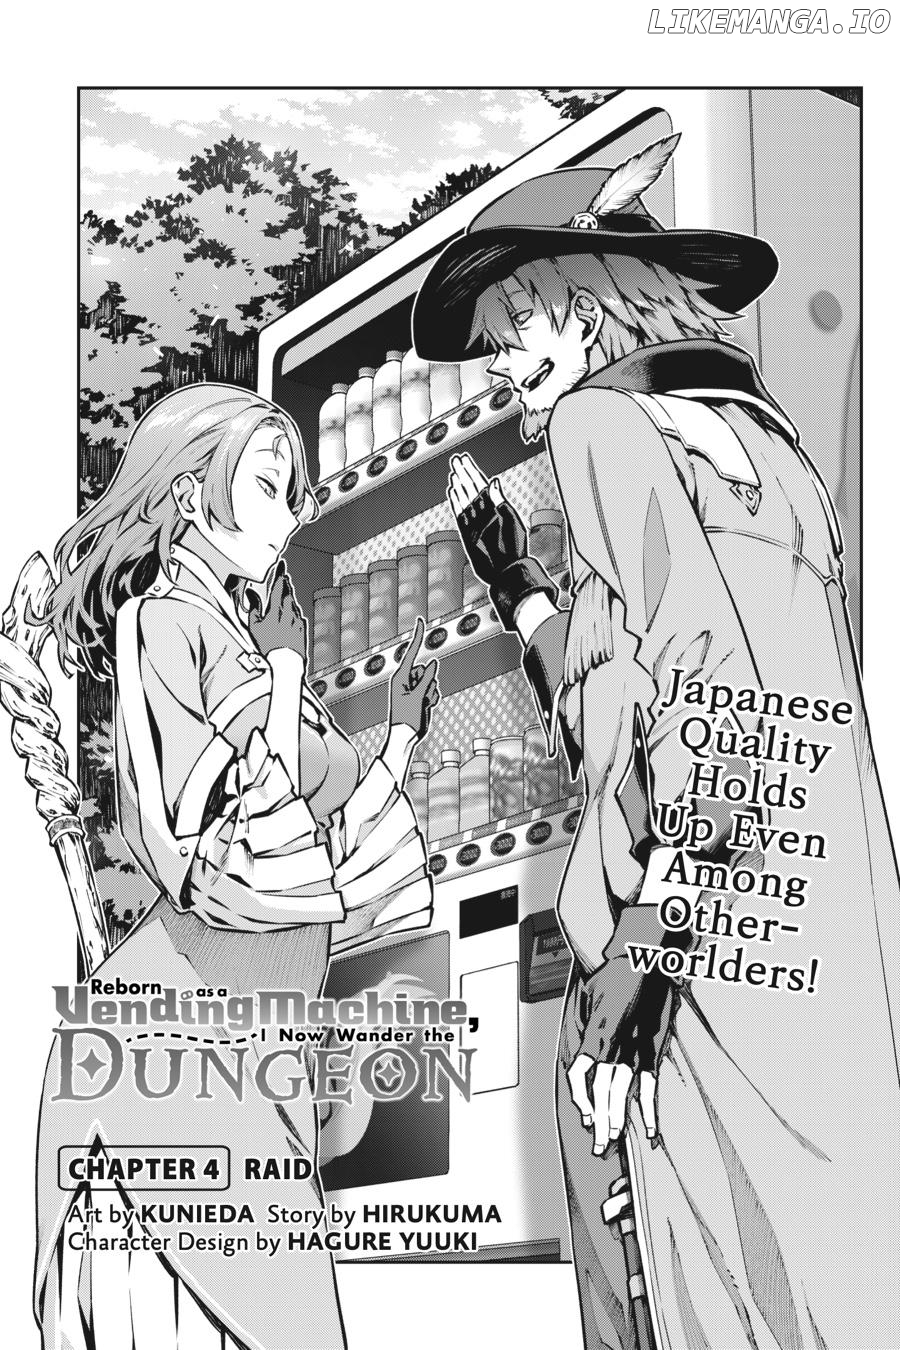 Reborn As A Vending Machine, I Now Wander The Dungeon chapter 4 - page 2